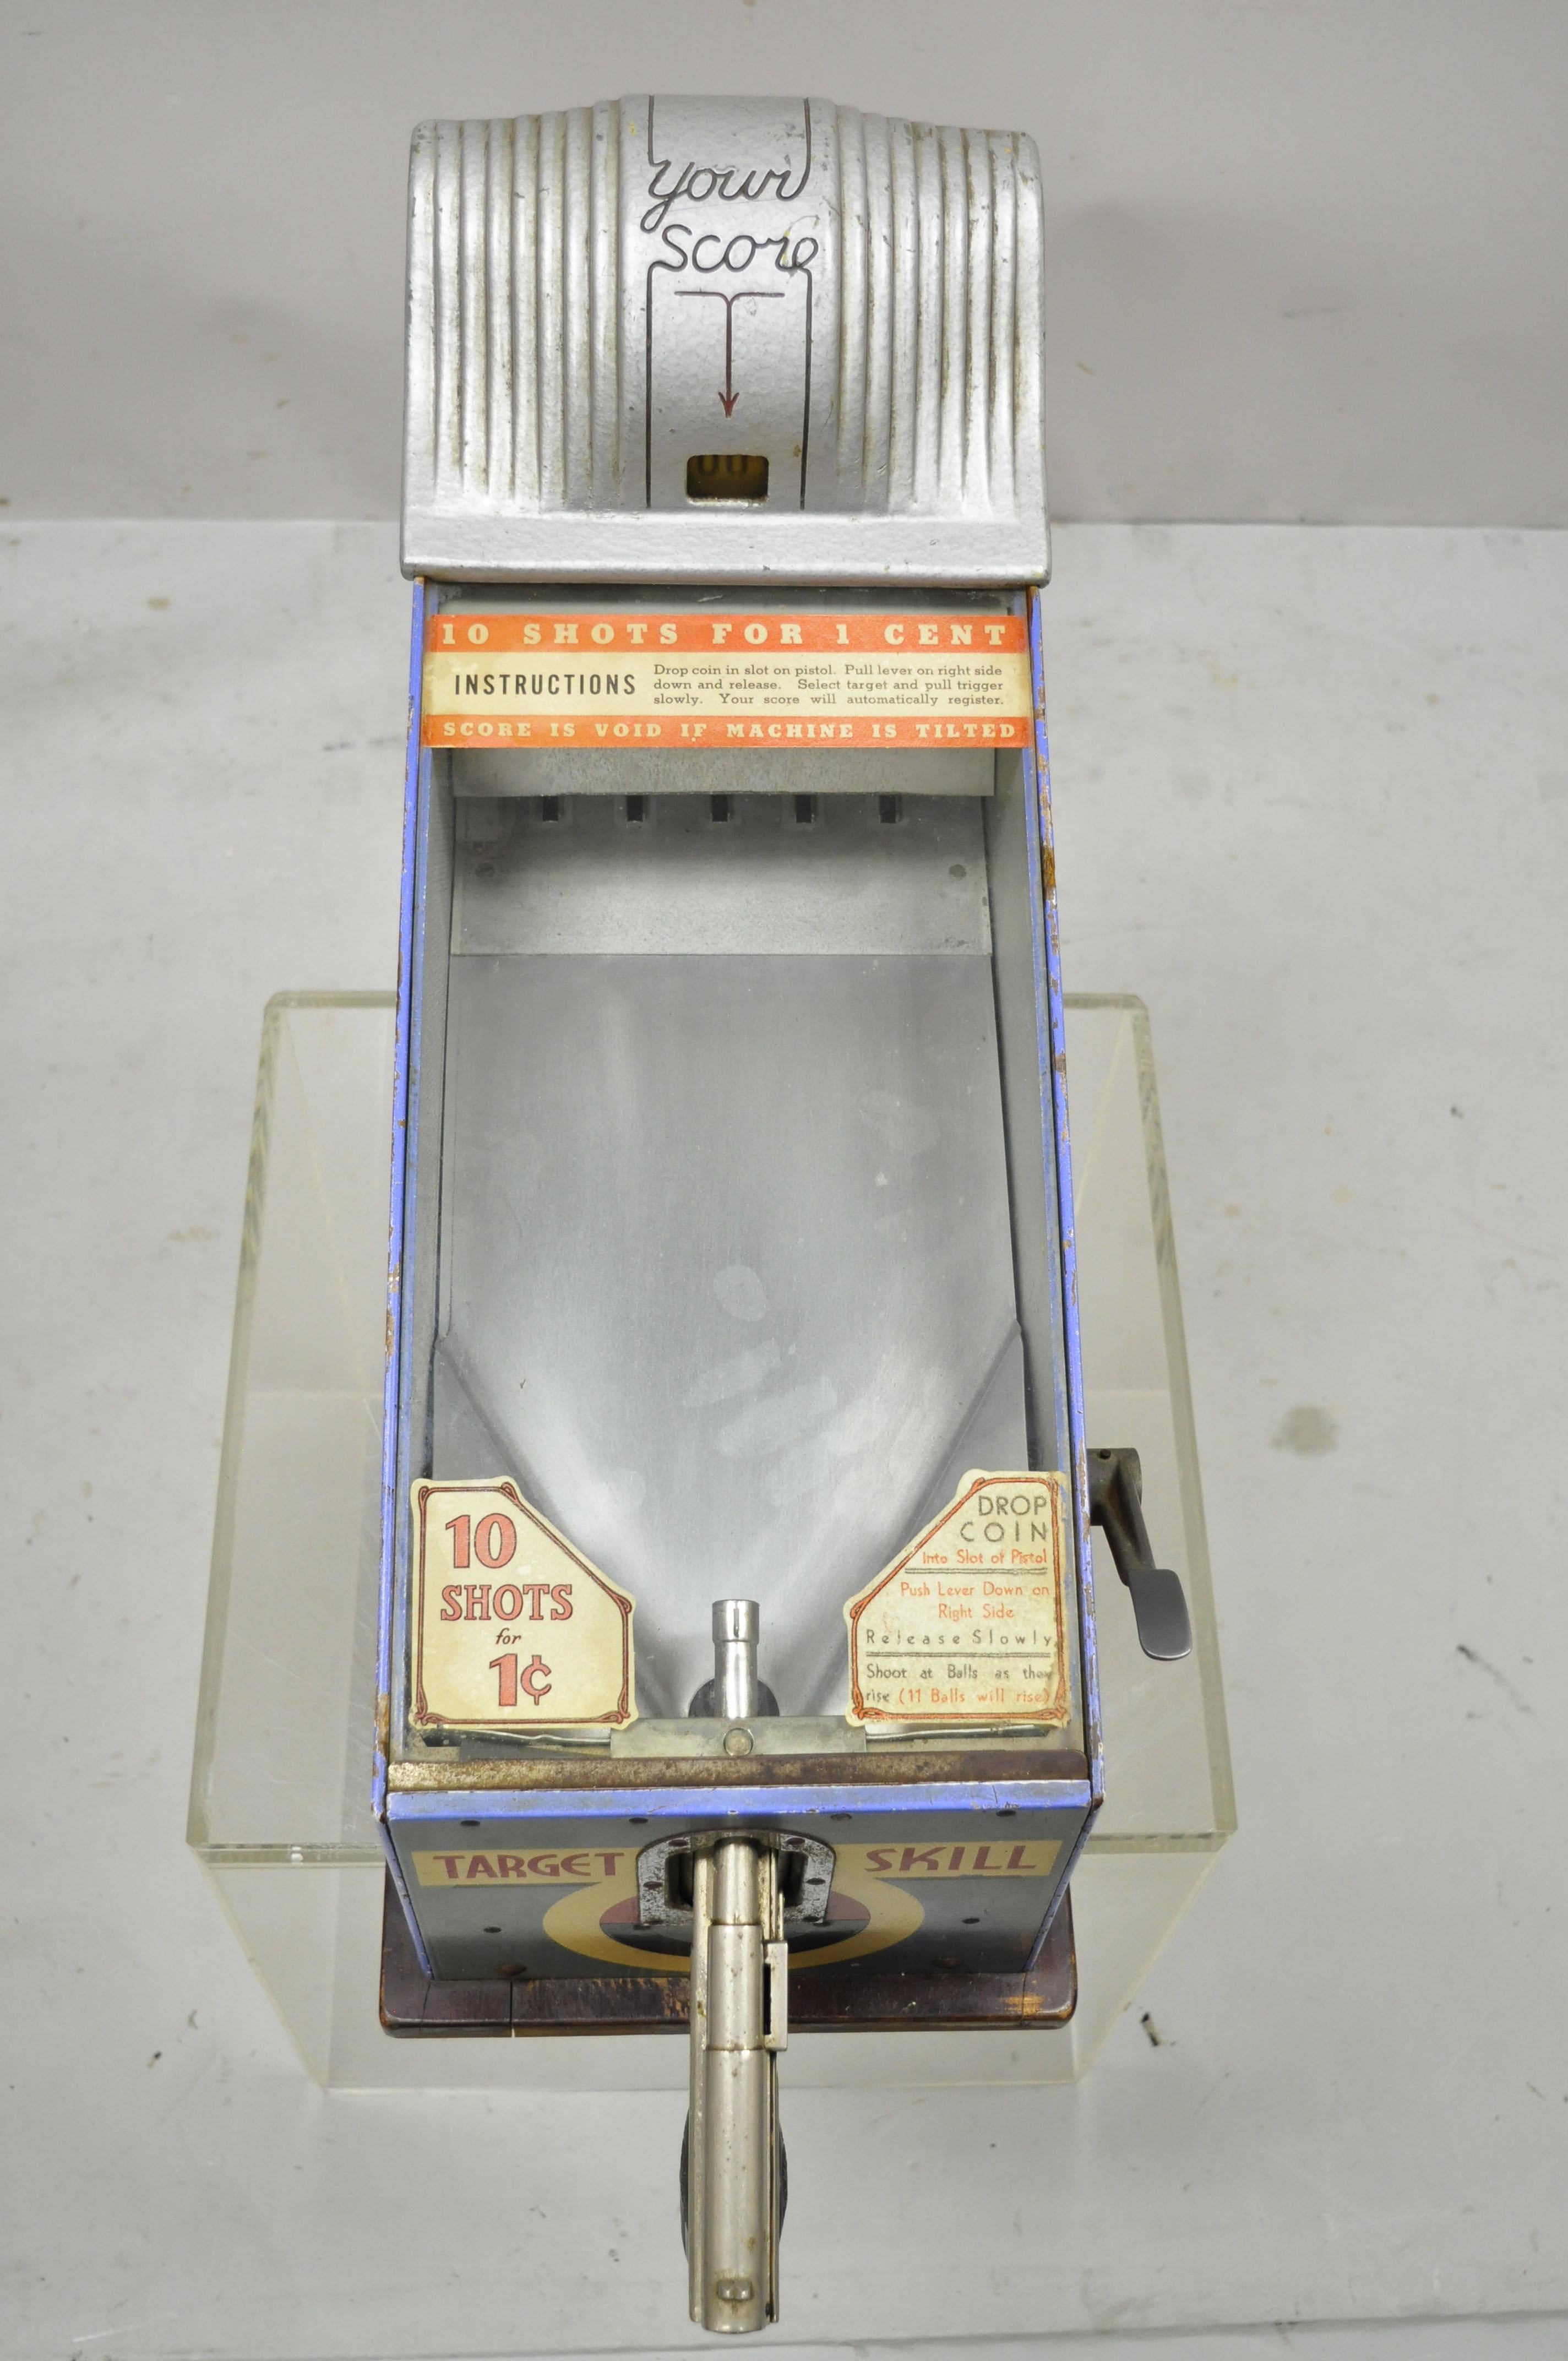 20th Century Vintage 1¢ ABT Mfg Corp Countertop Coin-Op Target Skill Arcade Game, Working